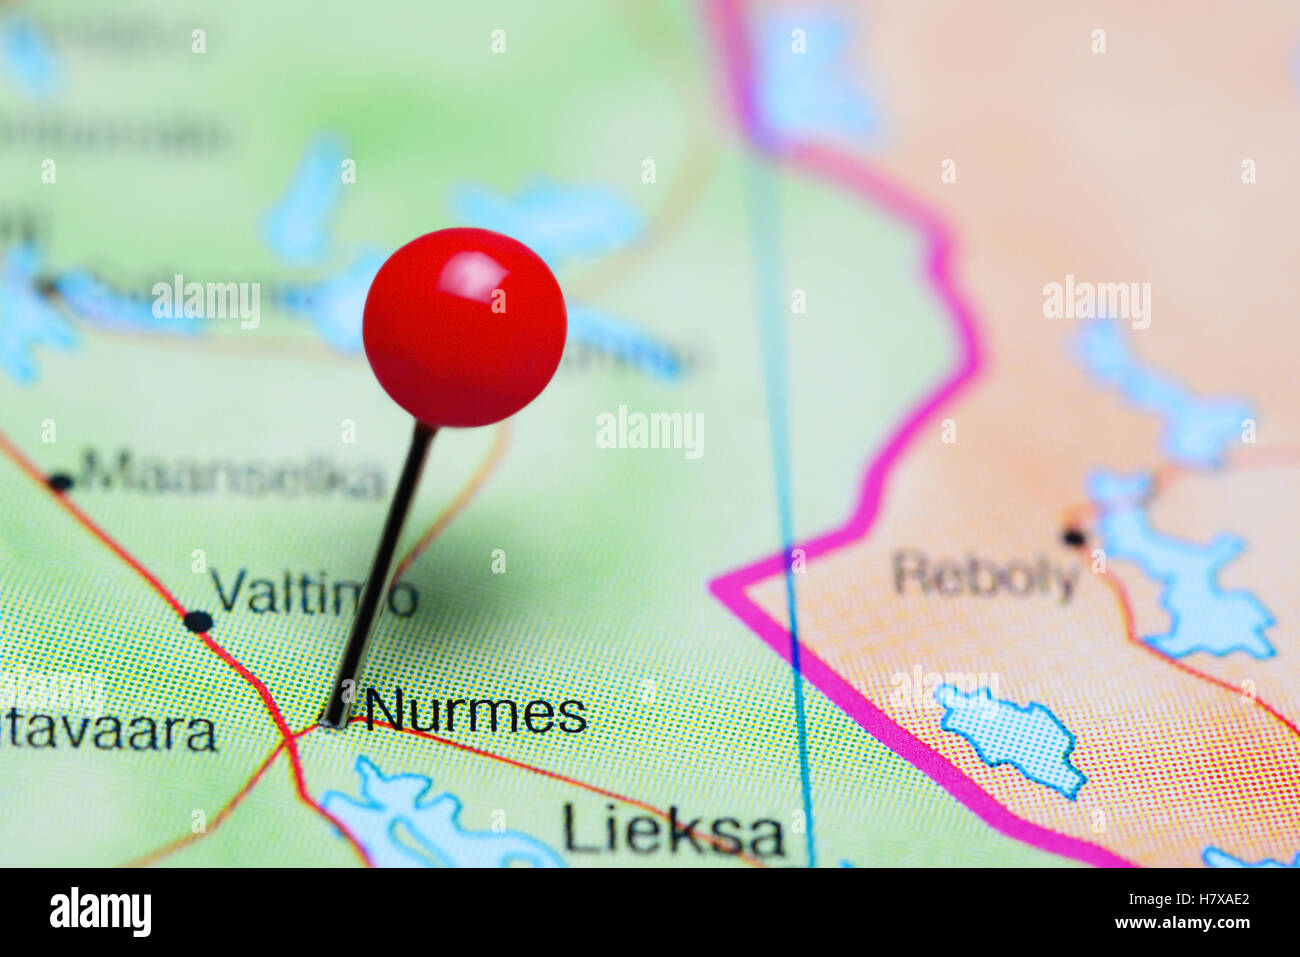 Nurmes pinned on a map of Finland Stock Photo